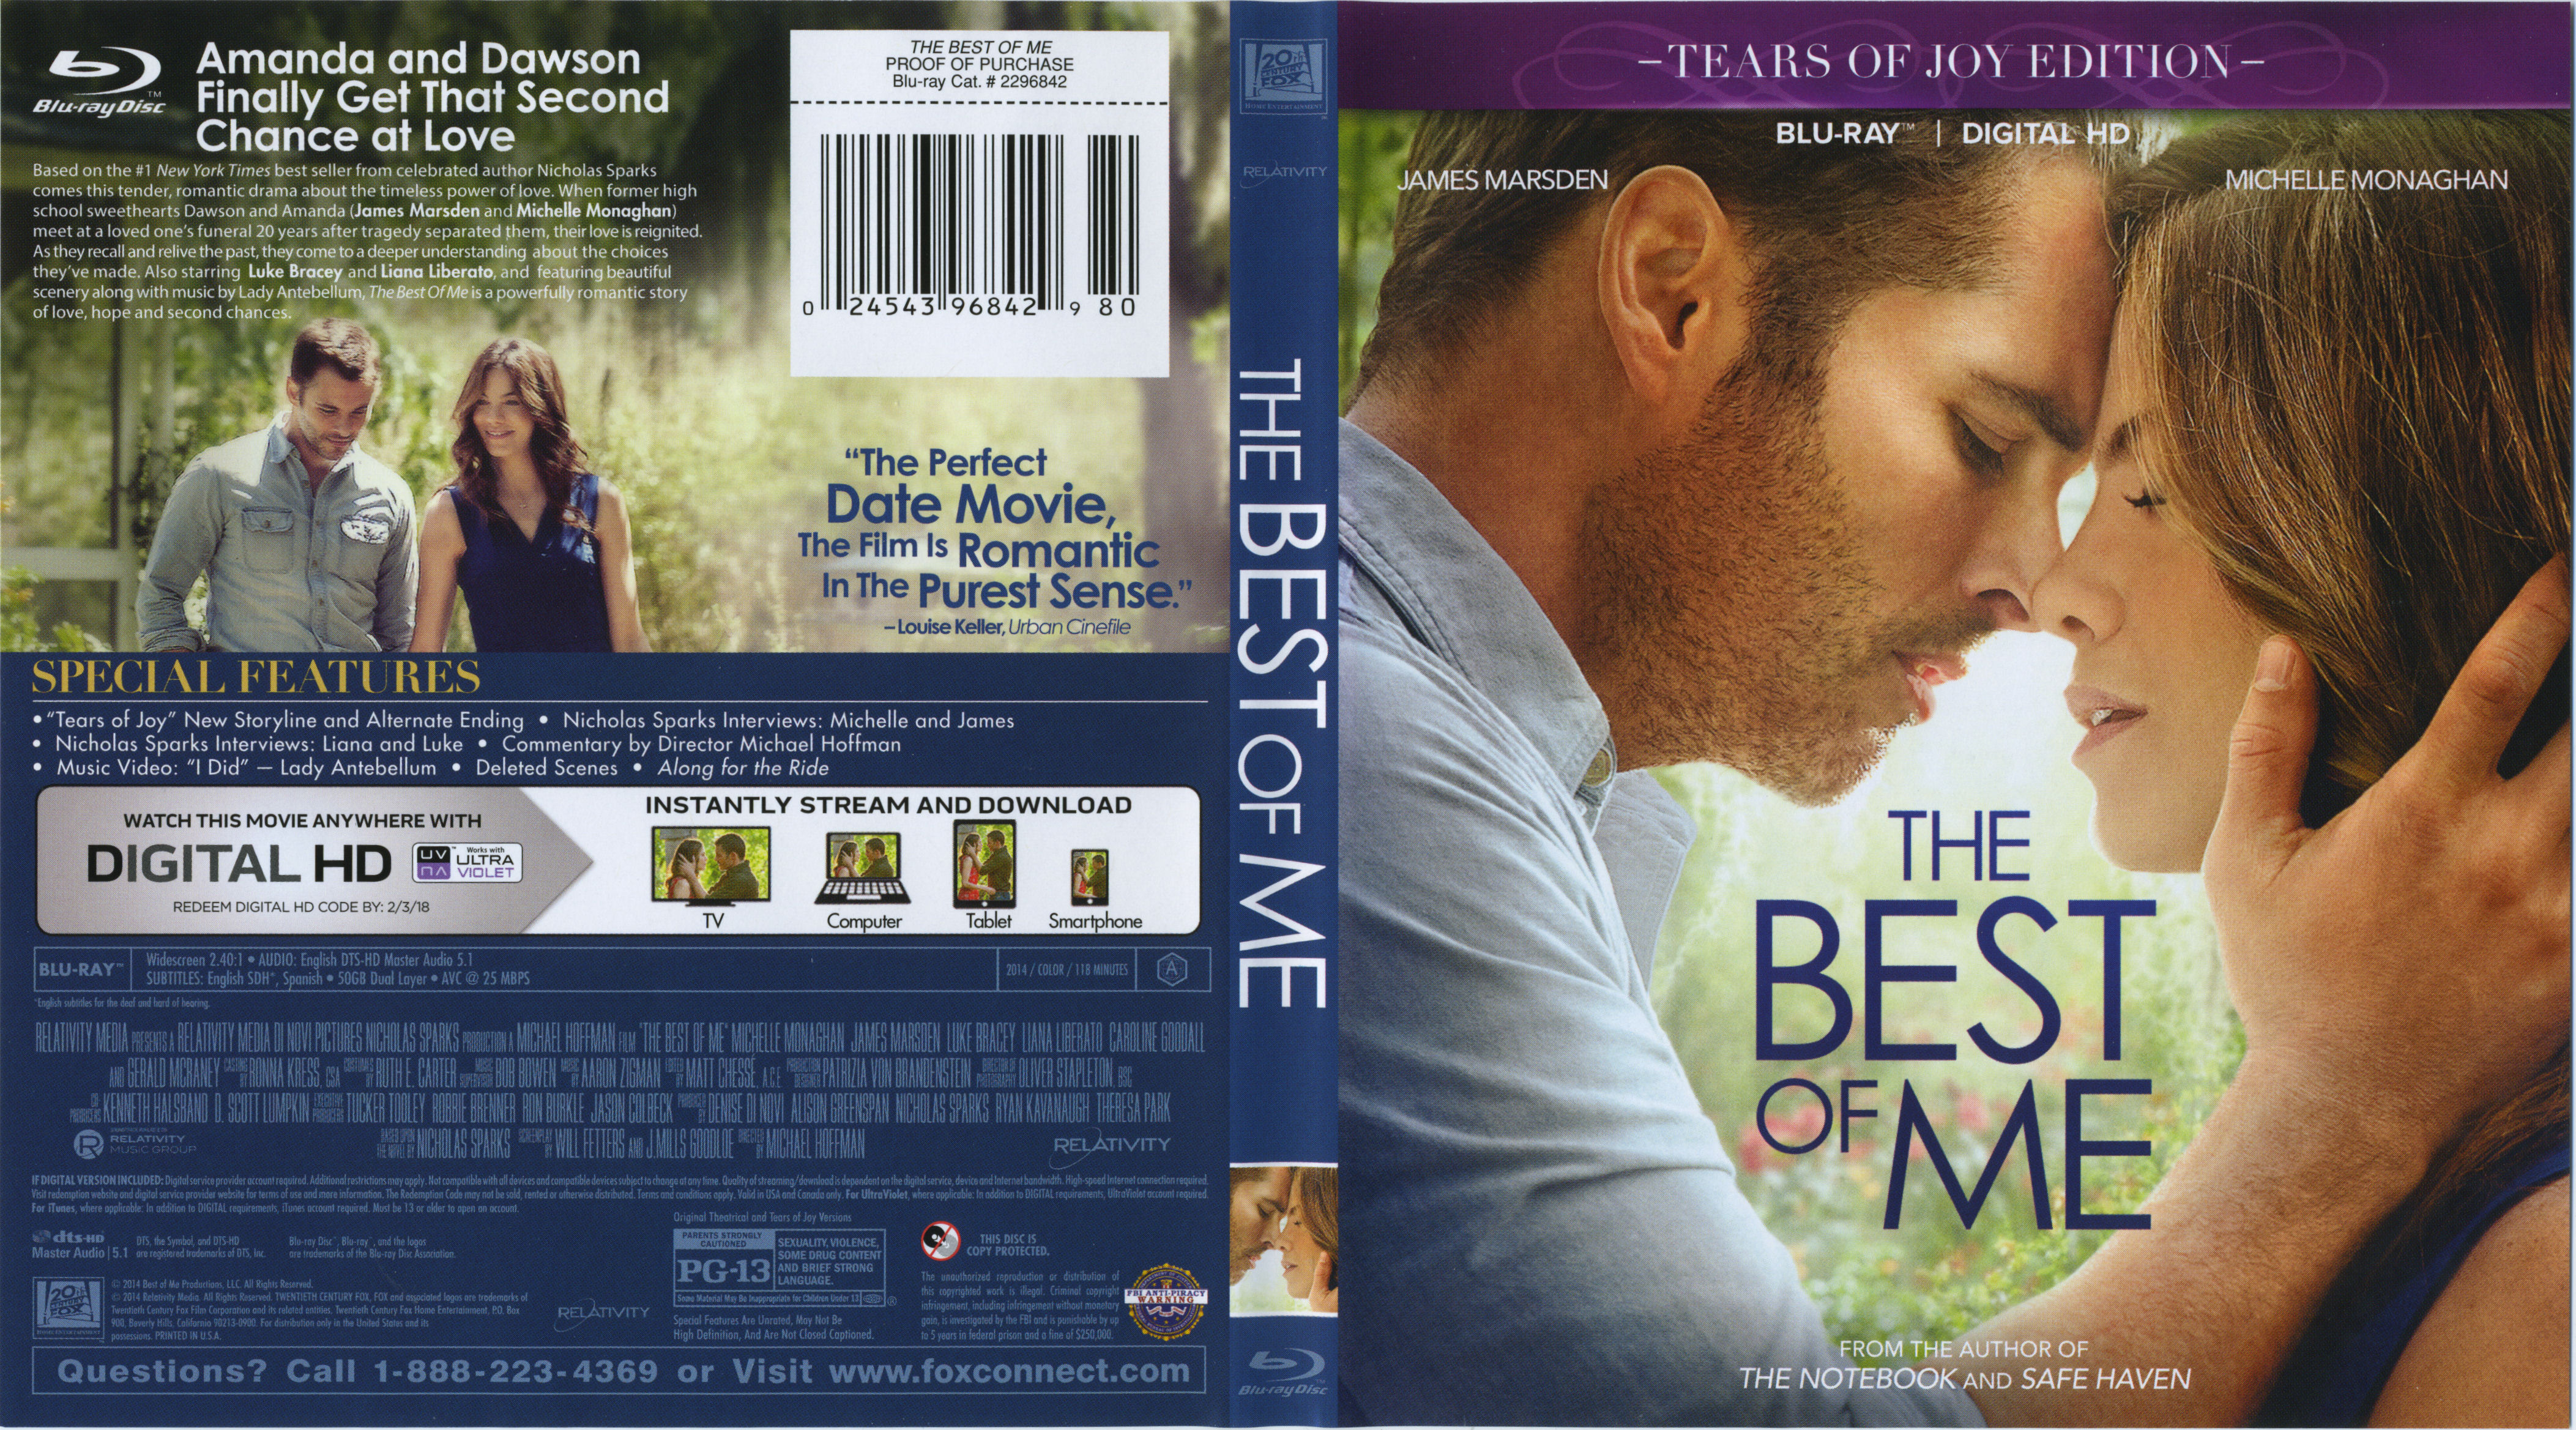 Jaquette DVD The Best of Me Zone 1 (BLU-RAY)